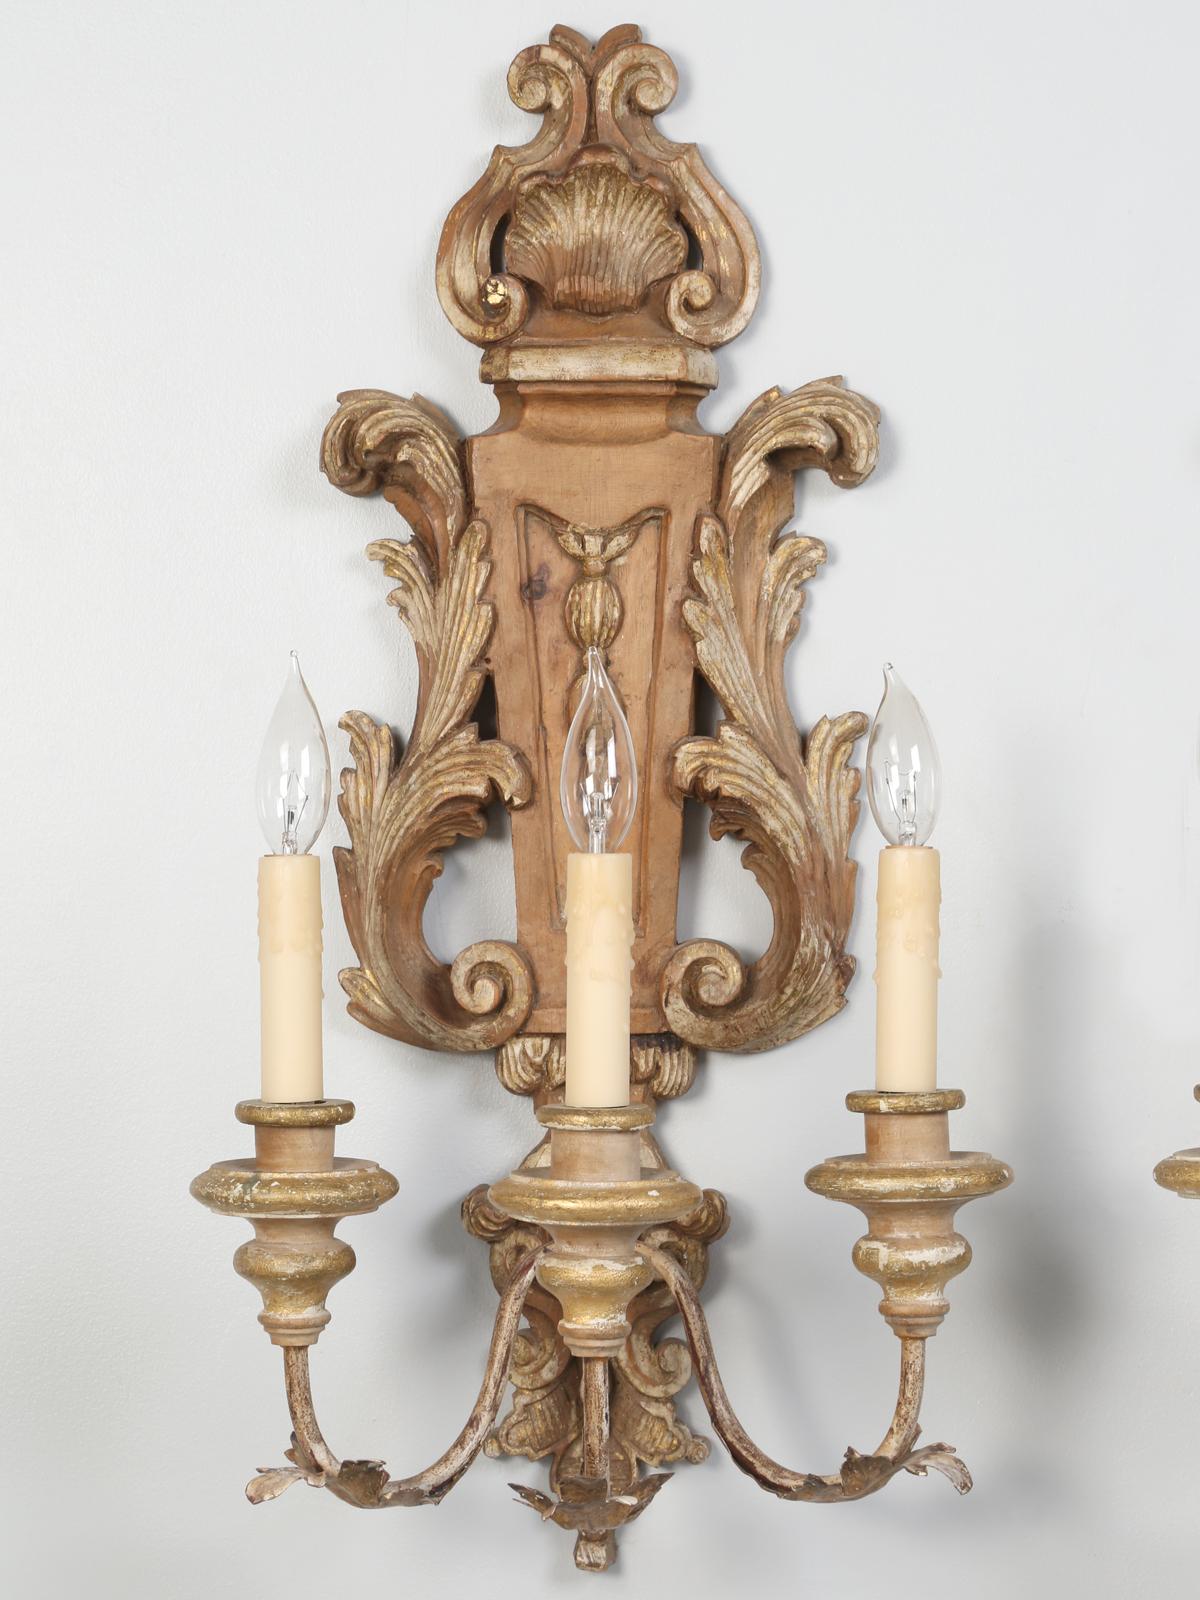 Hand-Carved Pair of Italian Hand Carved Wooden Sconces with Gold and Silver Leaf Accents